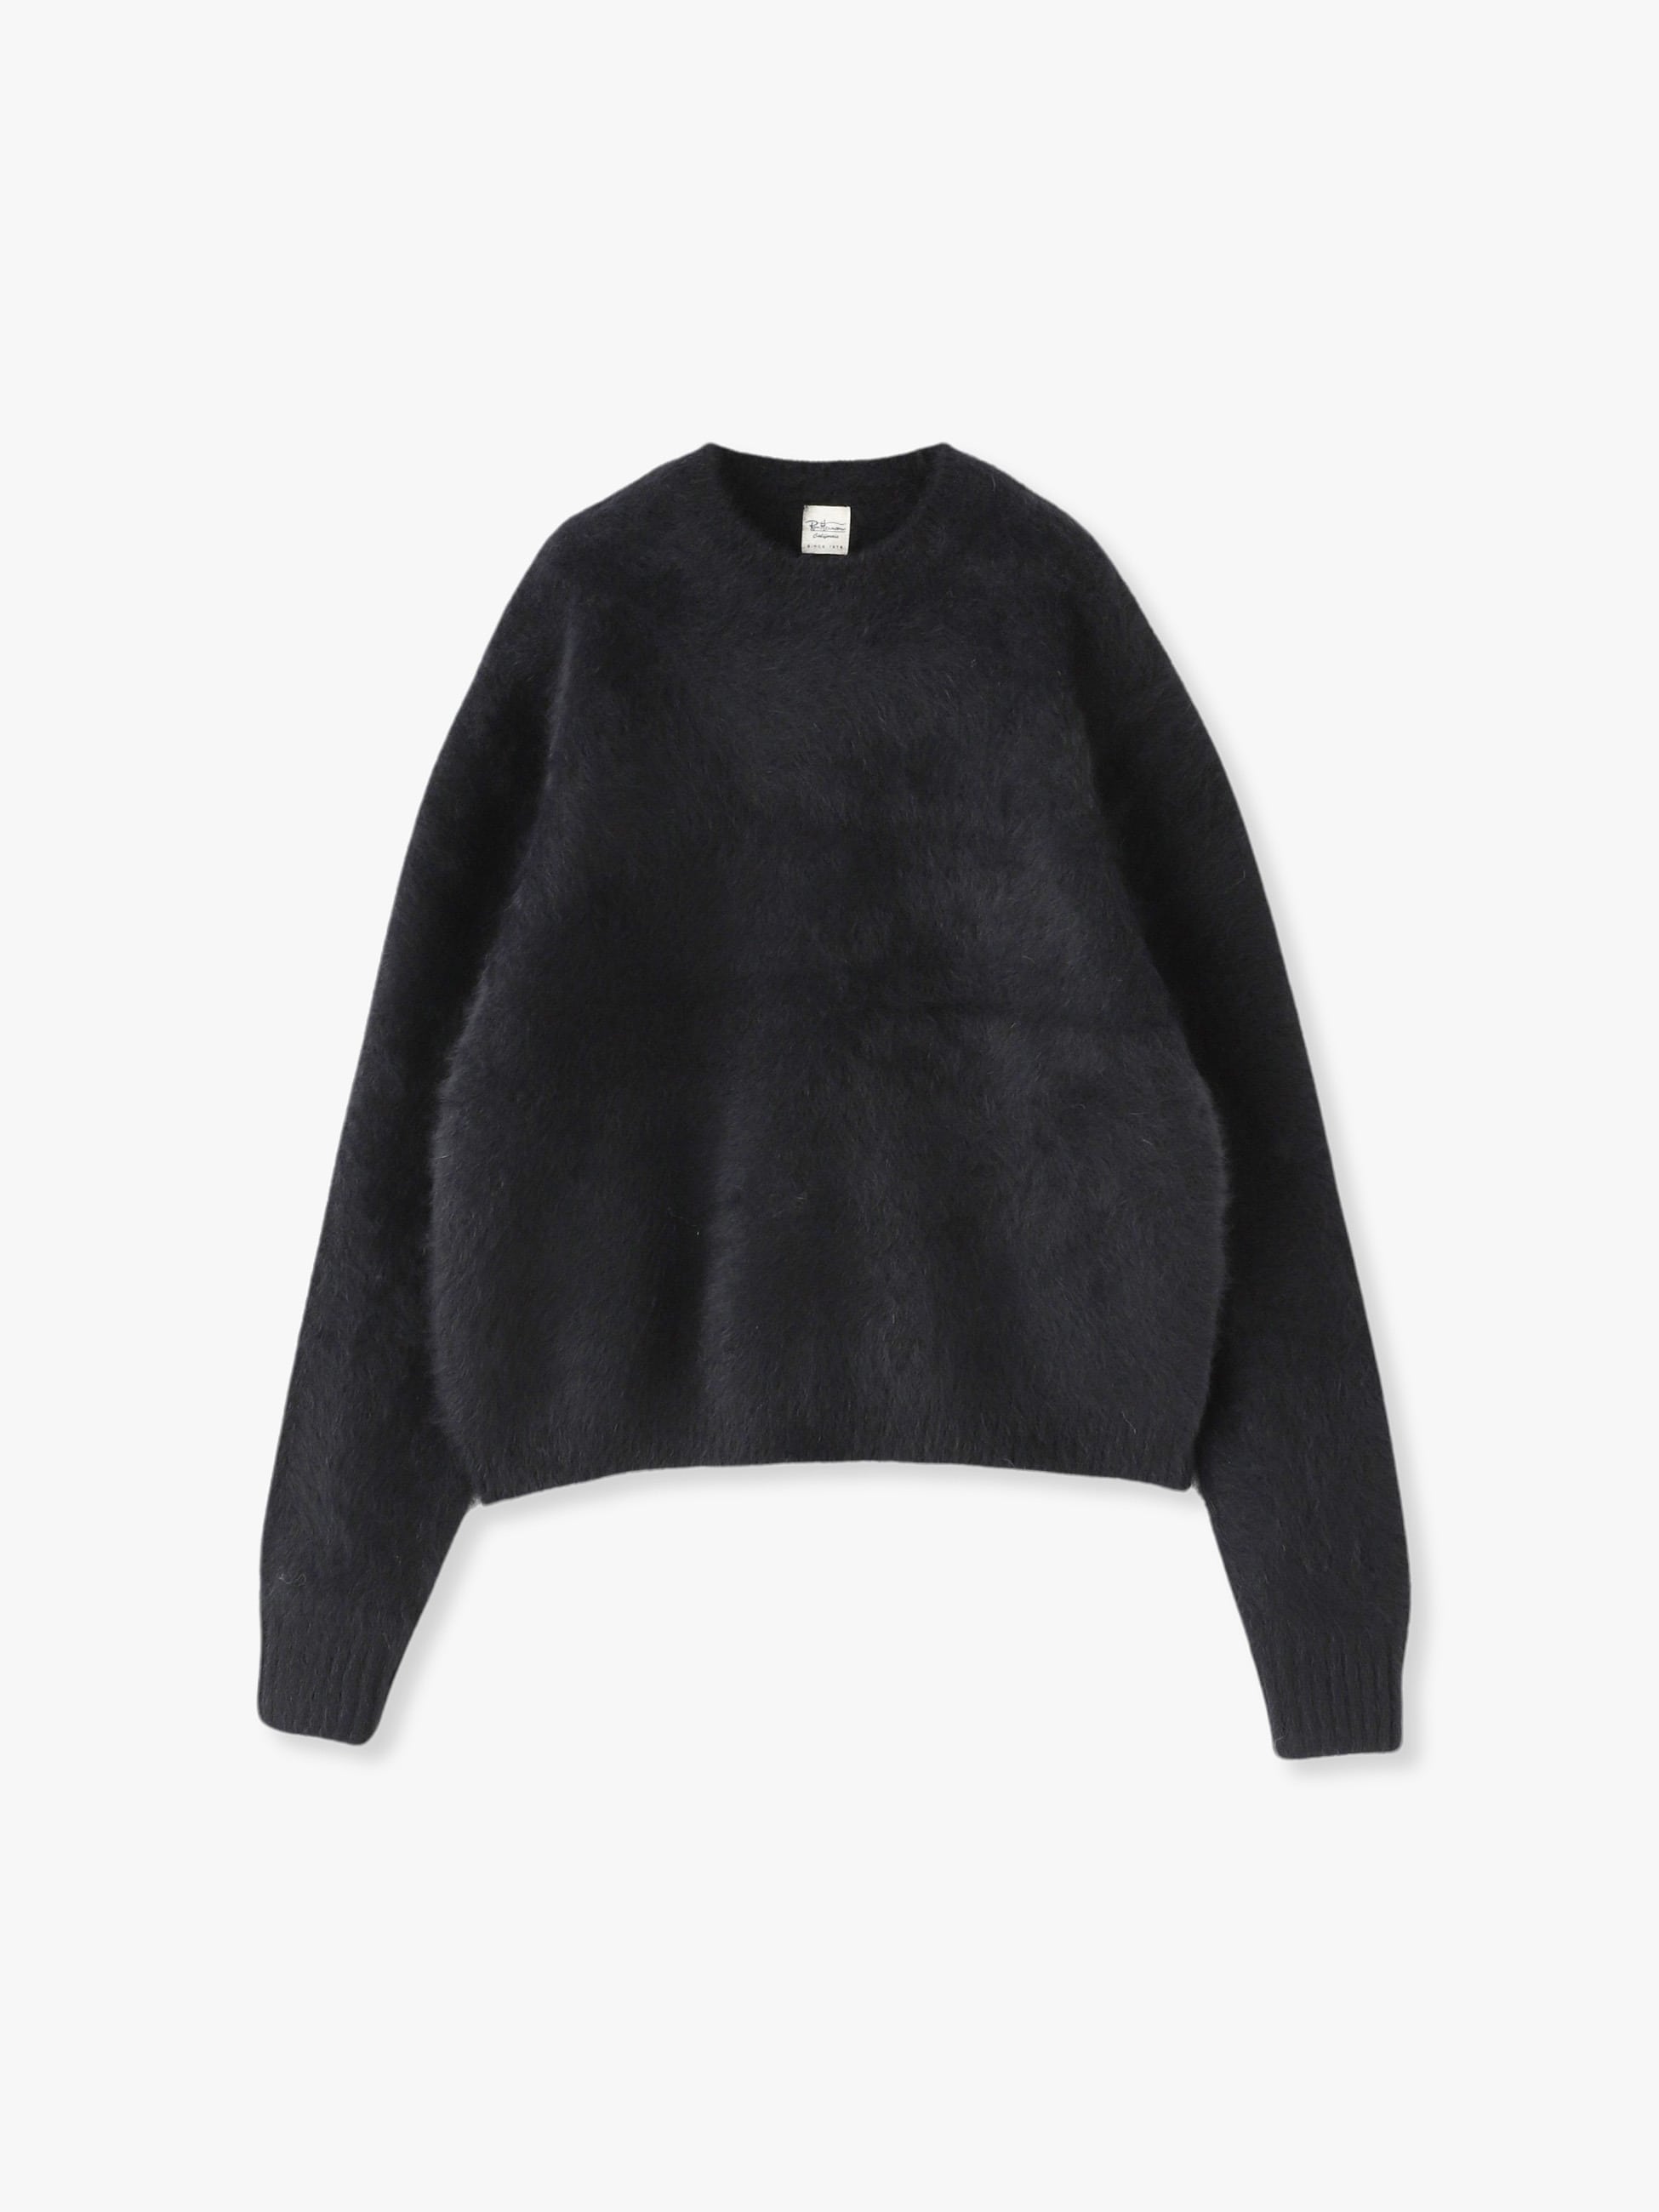 RonHerman Fox Cashmere Knit Pullover-